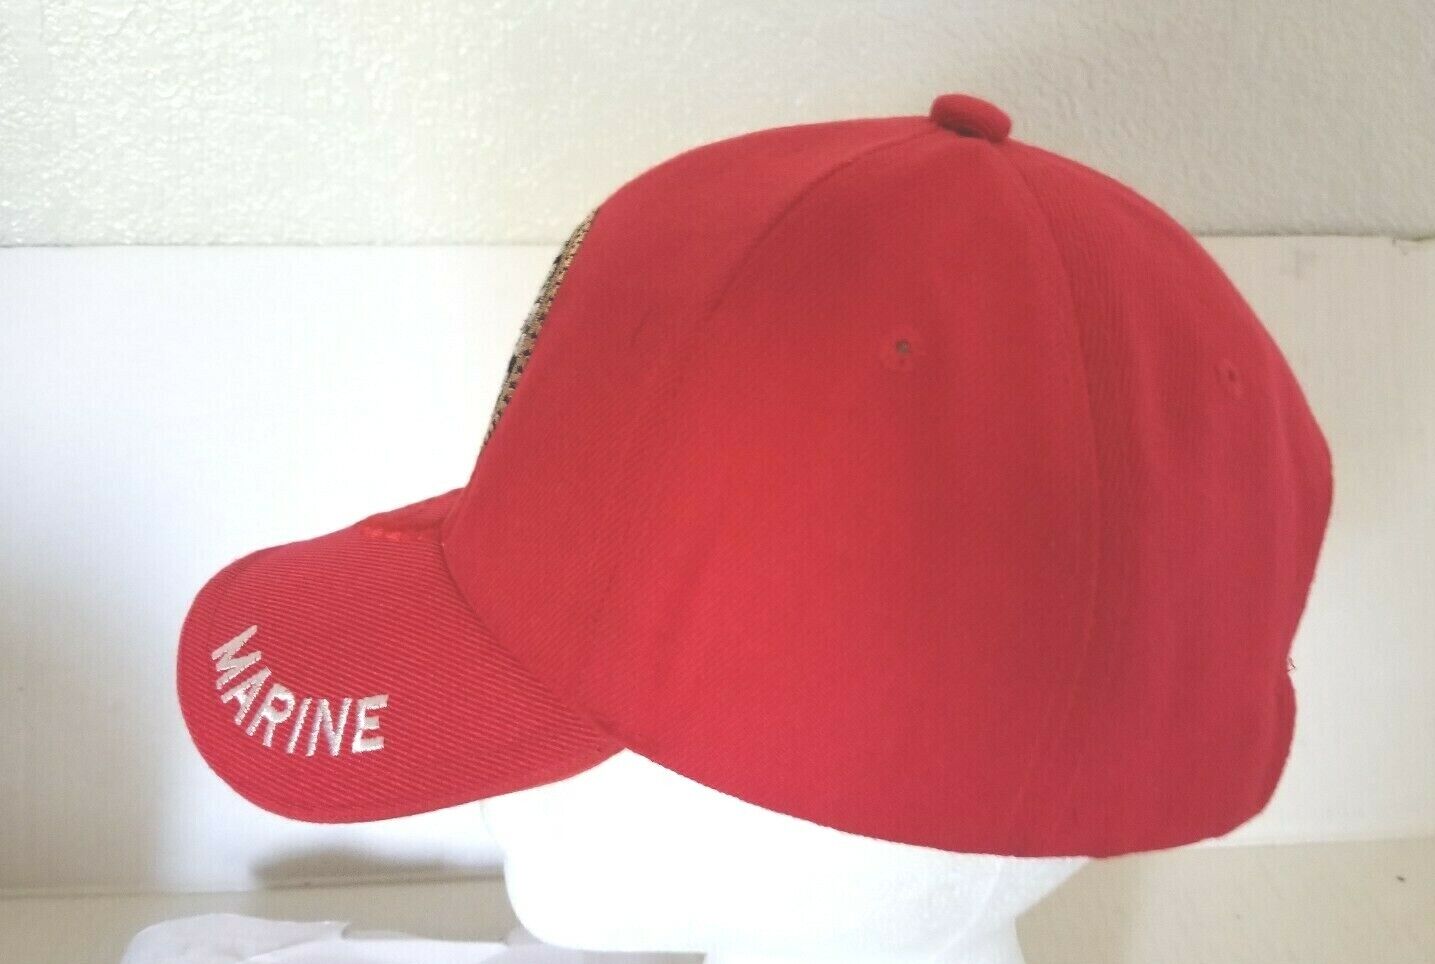 Fantastic Red Embroidered US Marine Corps  Ball Cap Hat Acrylic  Fastener back 